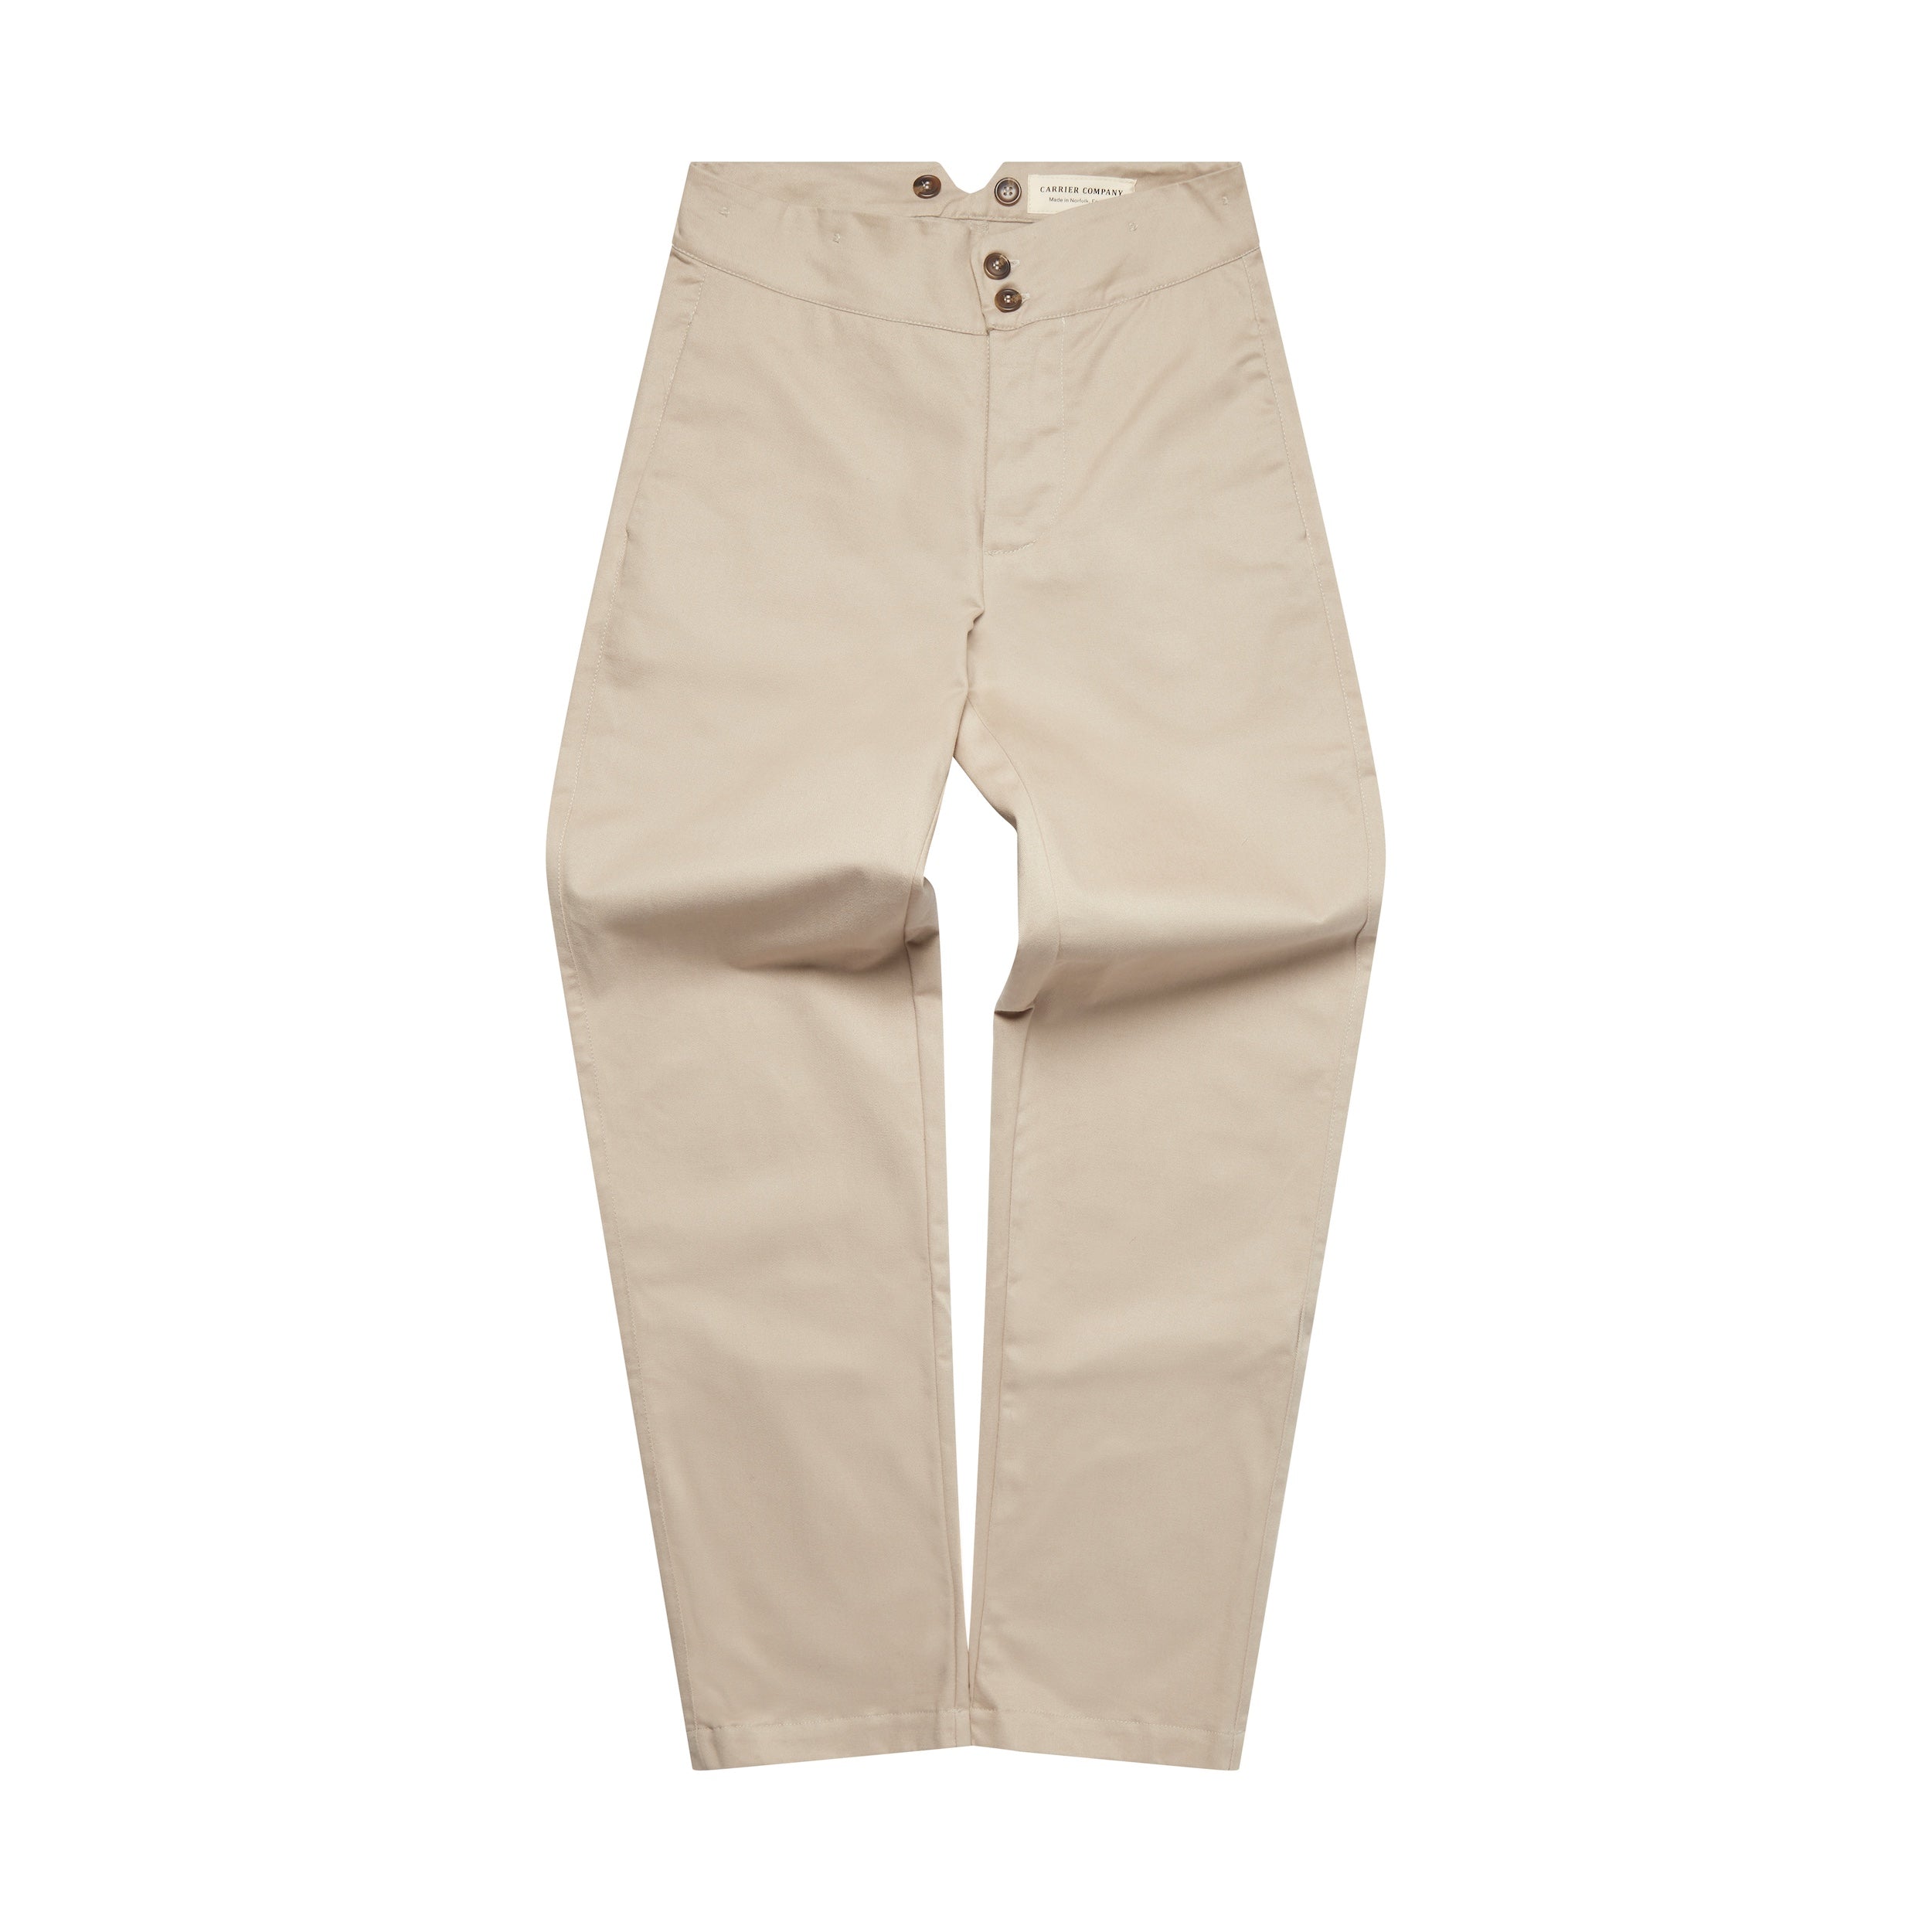 Carrier Company Colonial Trouser in Stone